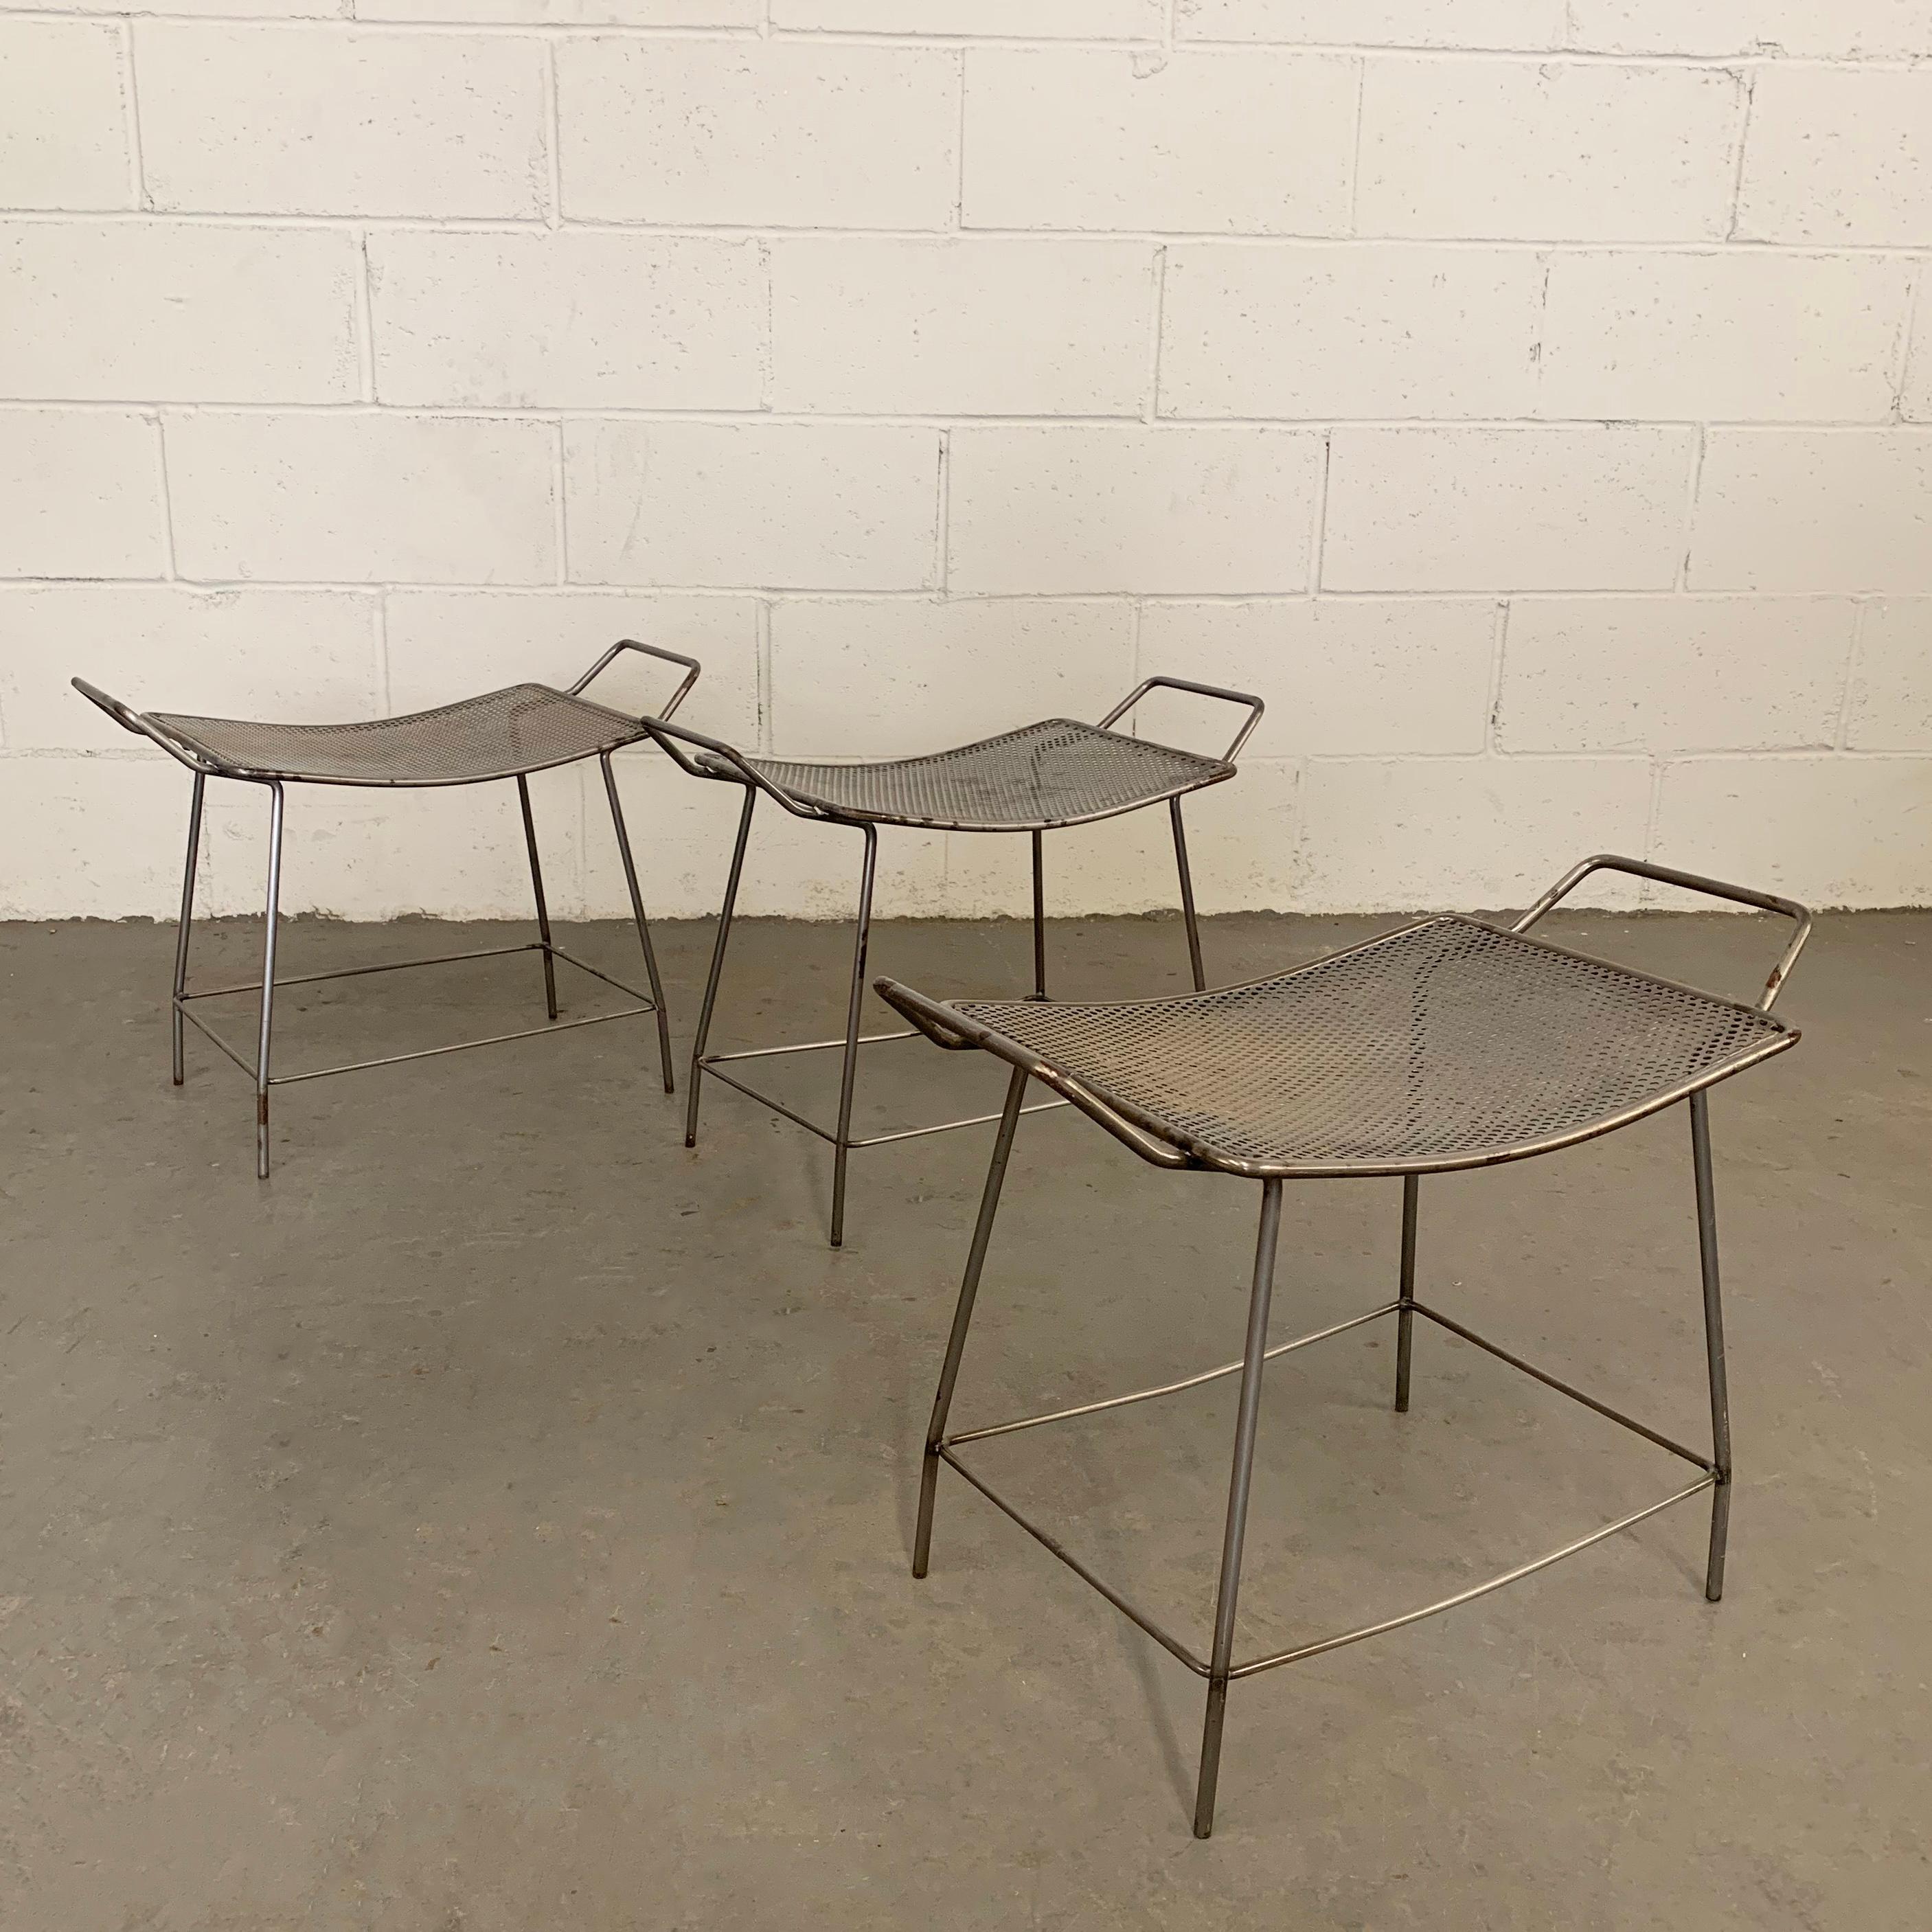 Industrial, brushed steel, short, hospital stools feature seats that slope down one inch with handles on either side. The stools are sold separately.